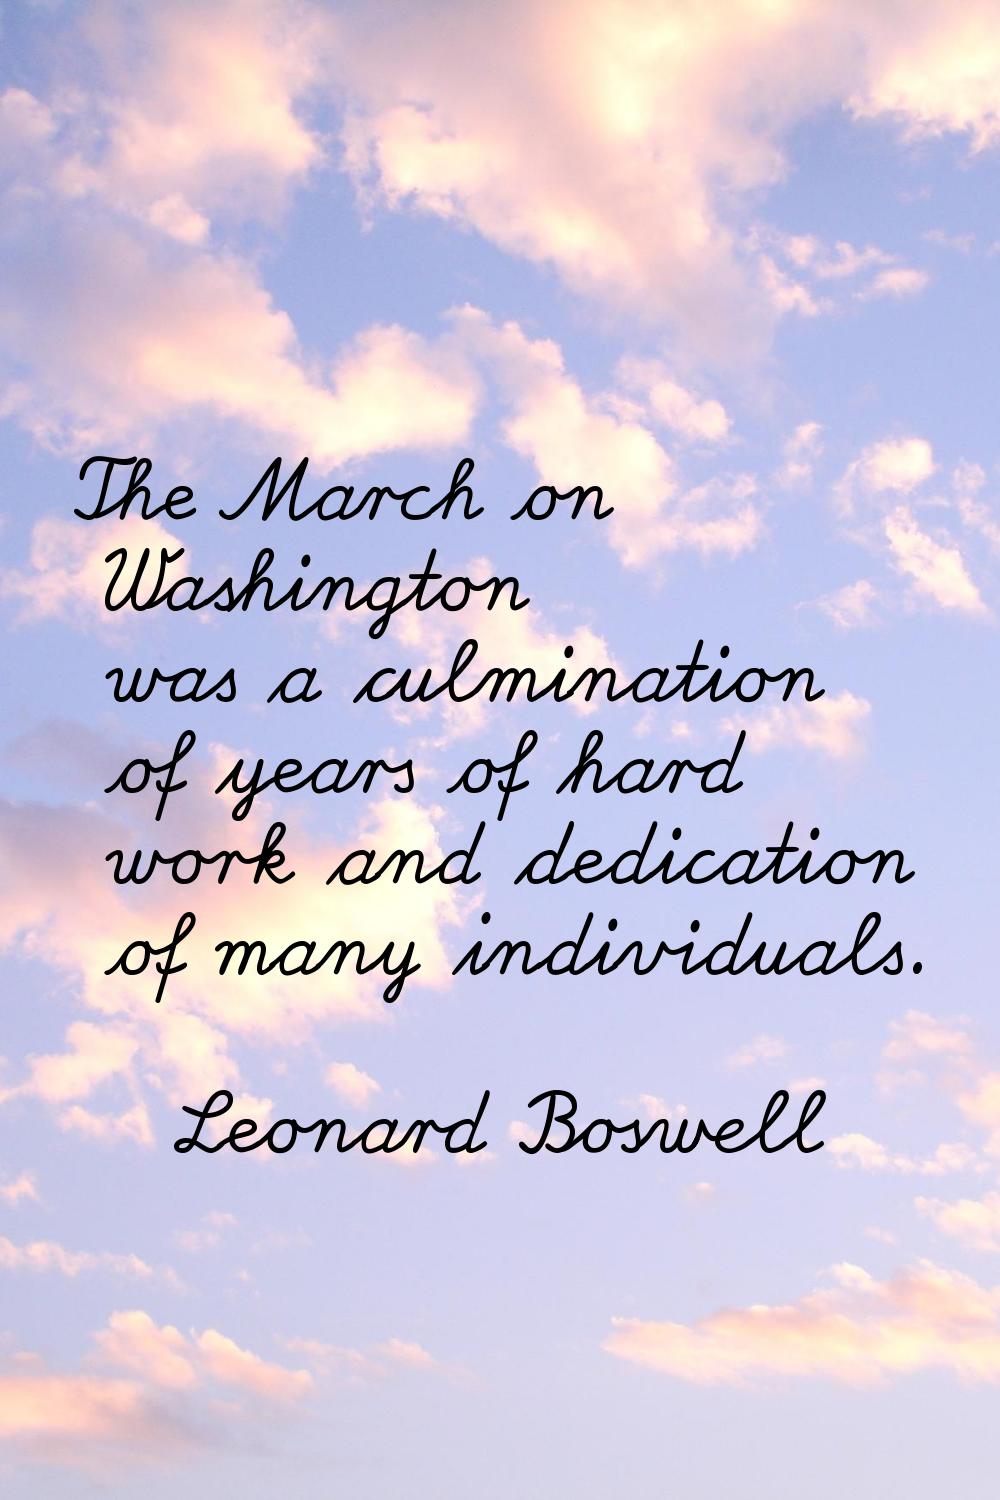 The March on Washington was a culmination of years of hard work and dedication of many individuals.